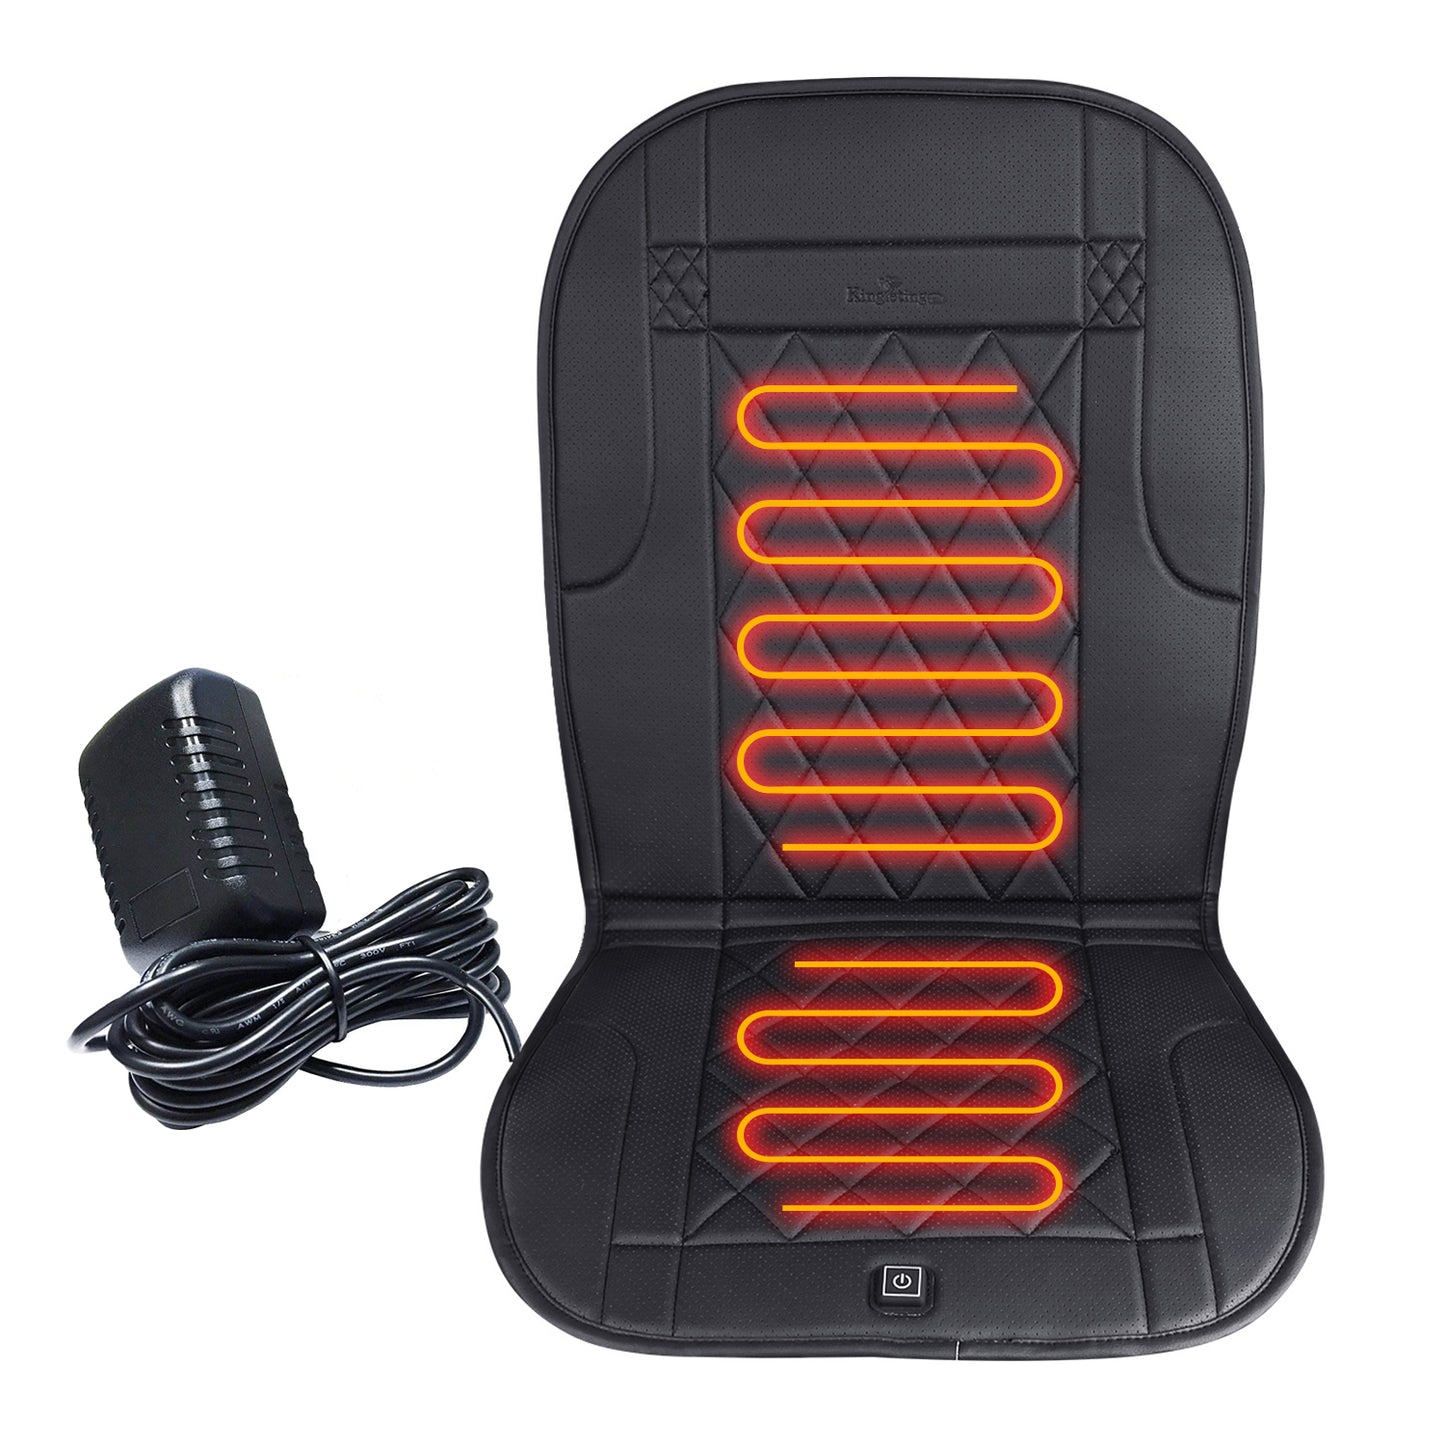 Kingleting Heated Seat Cushion with Pressure-Sensitive Switch,Heat Seat Cover for Home, Office Chair and More ‎LYLX01